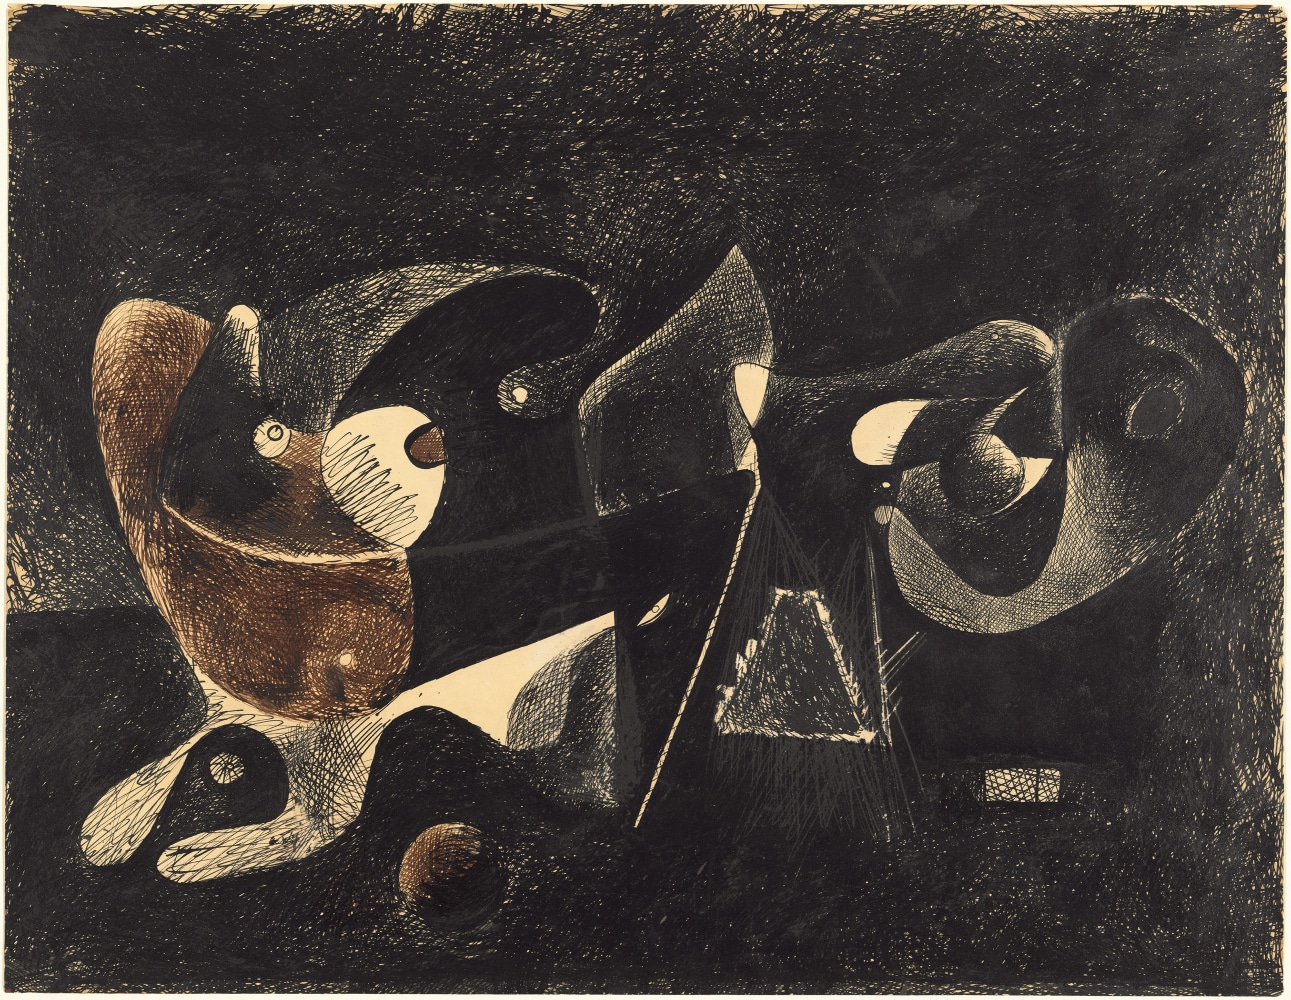 Abstract composition in brown and black ink with significant cross-hatching